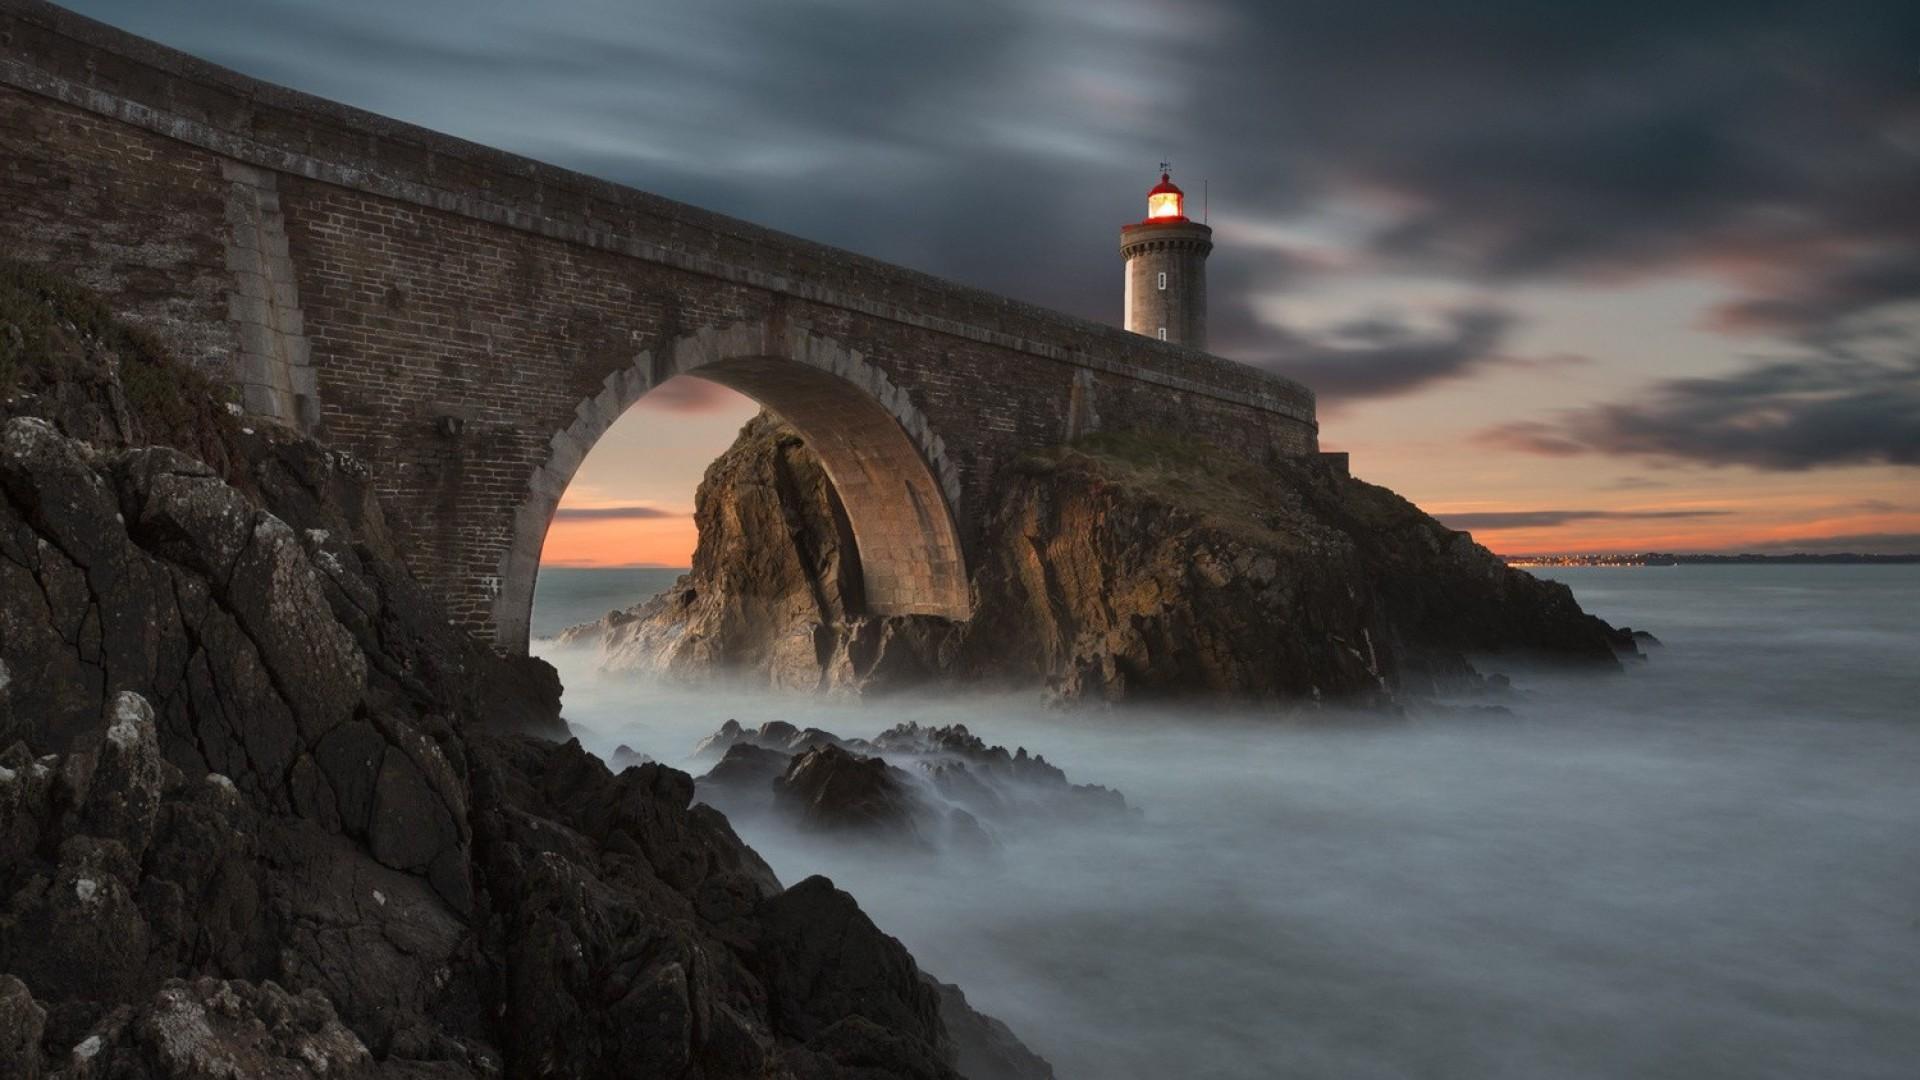 Lighthouse. Storm HD Wallpaper for Android